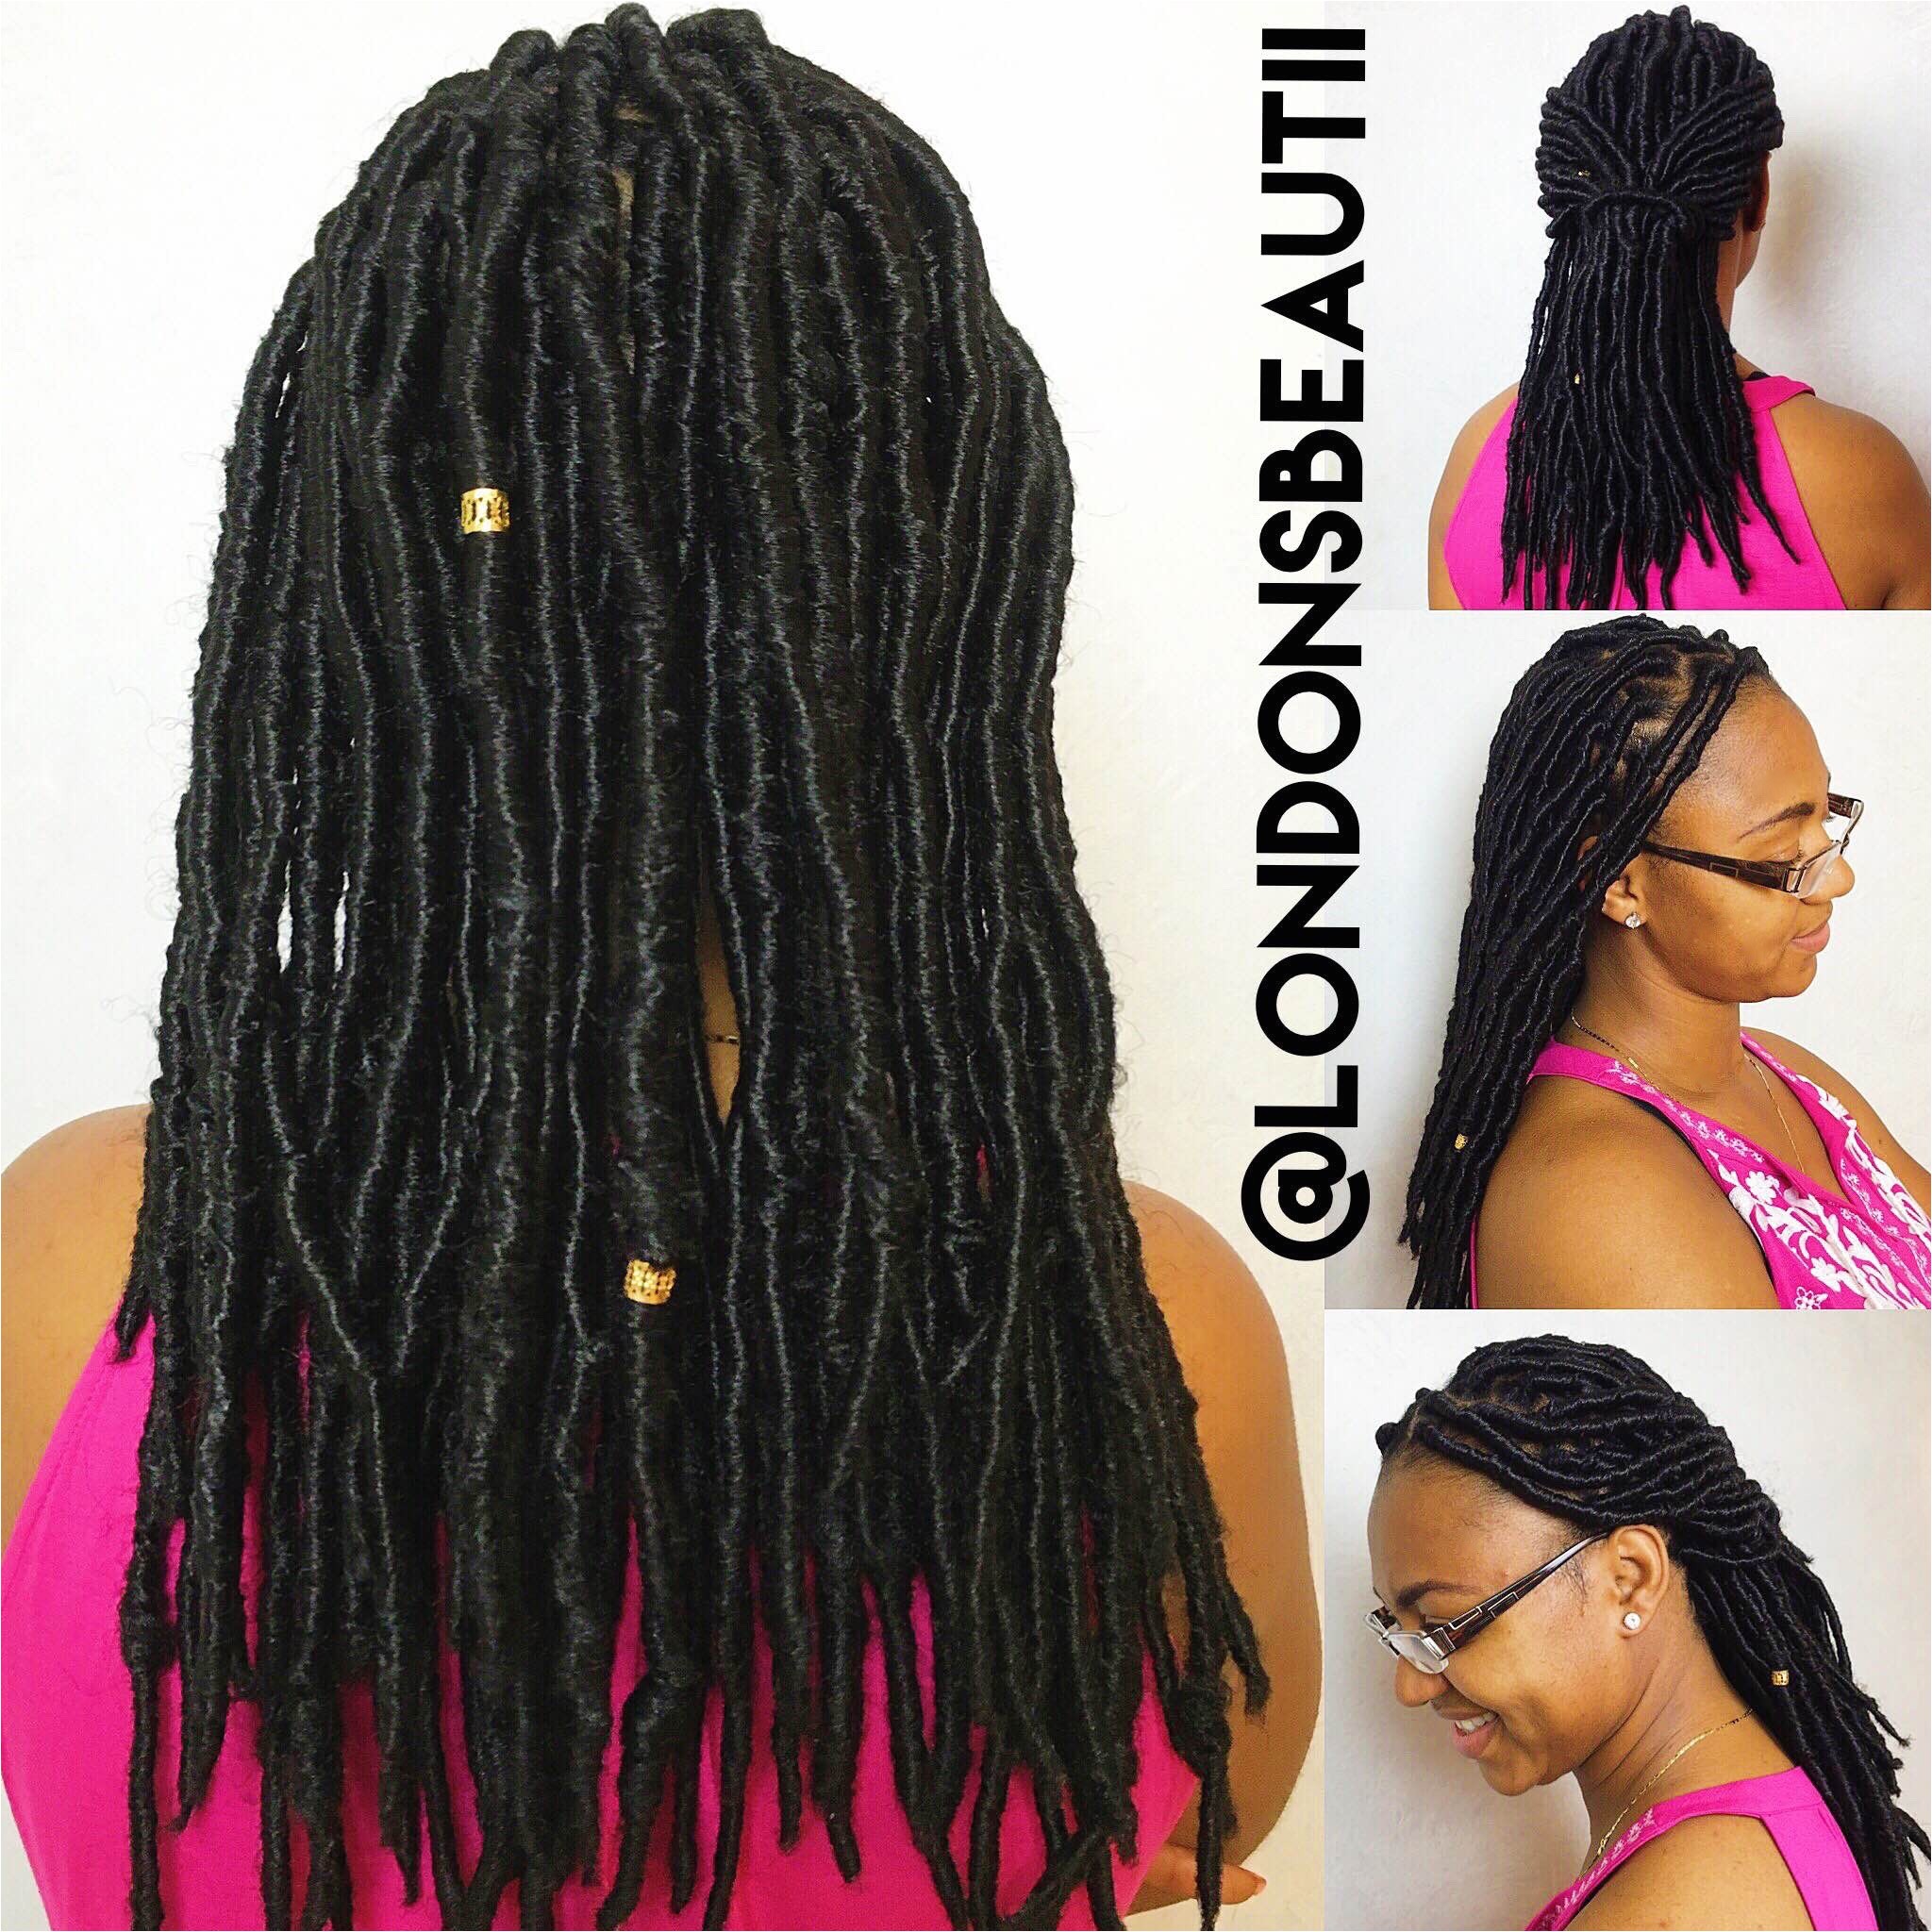 e Braid Hairstyles Beautiful Loc Hairstyles Awesome Dreadlocks Hairstyles 0d